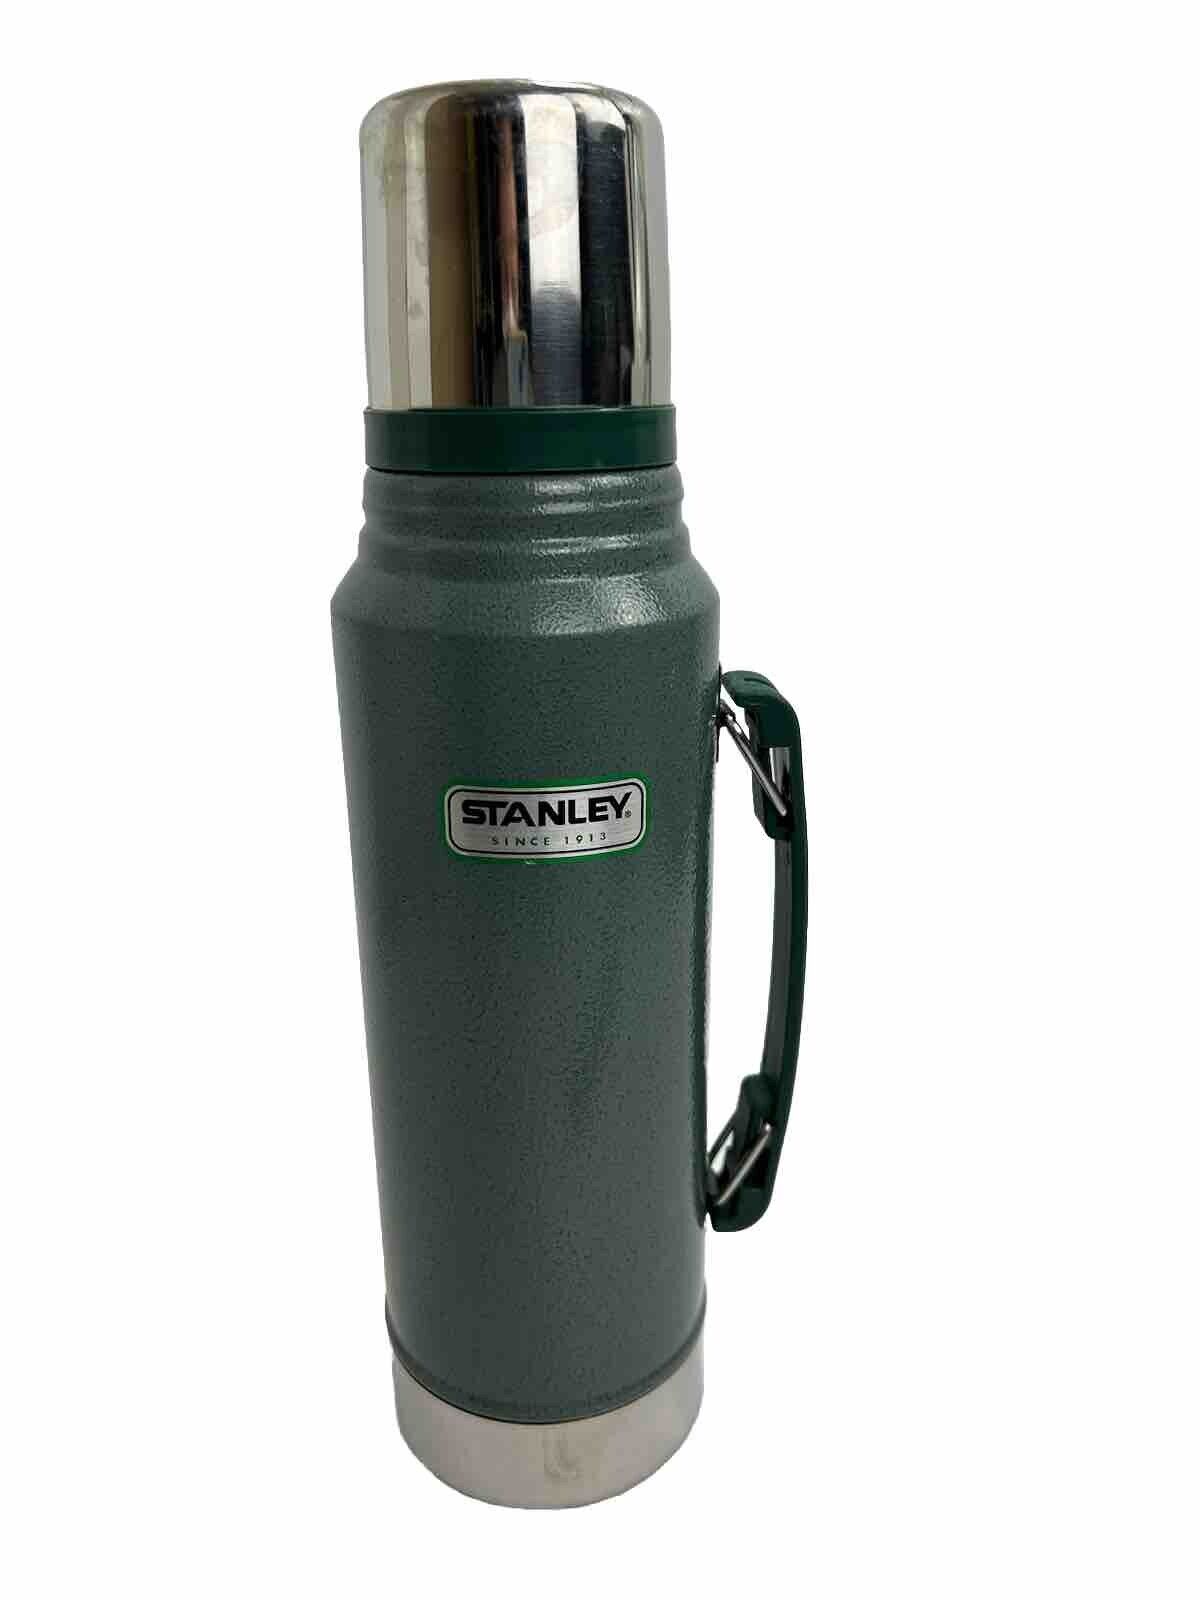 Vintage Stanley Aladdin A-944DH Green Silver Vacuum Bottle Thermos - 1 Quart